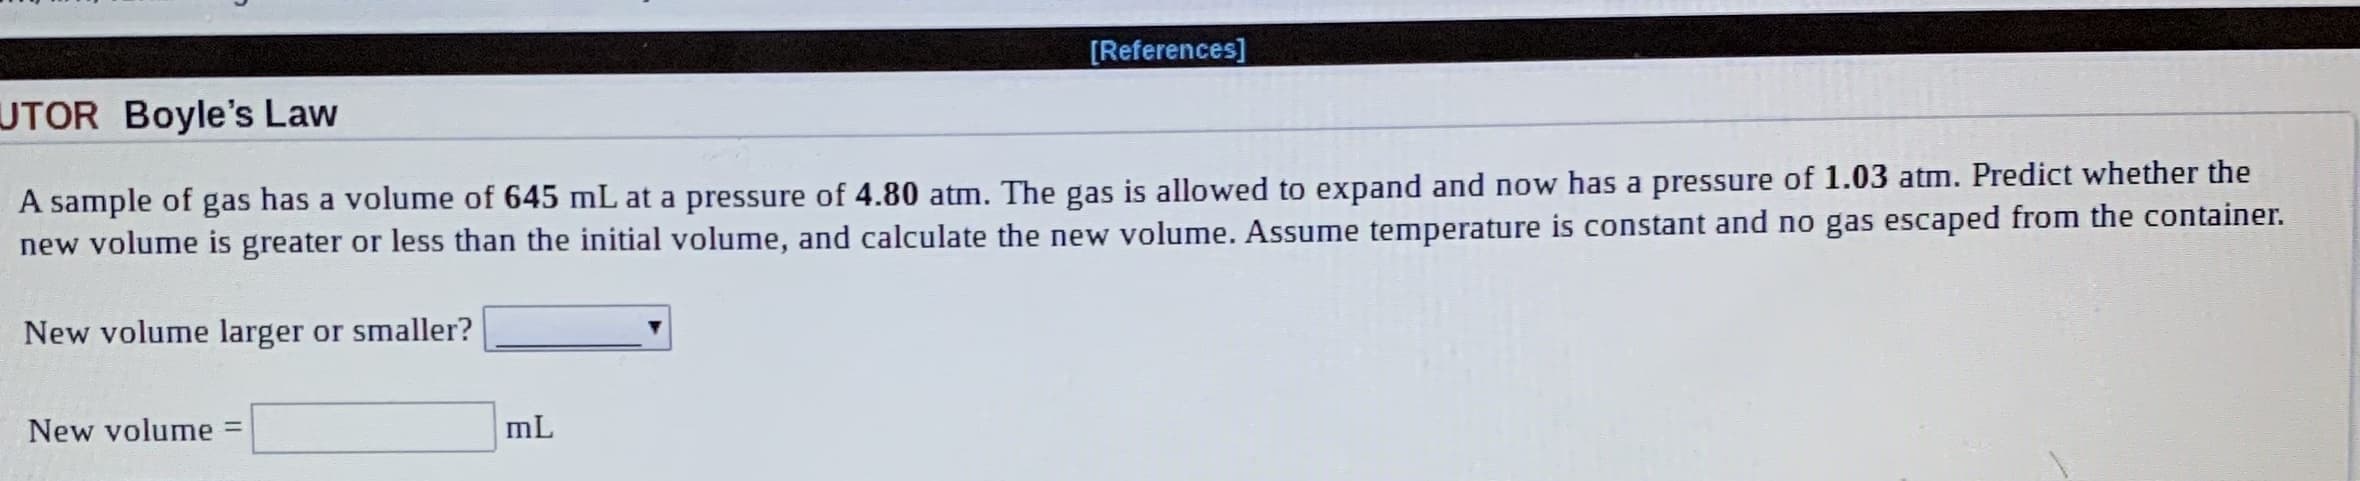 [References]
UTOR Boyle's Law
A sample of gas has a volume of 645 mL at a pressure of 4.80 atm. The gas is allowed to expand and now has a pressure of 1.03 atm. Predict whether the
new volume is greater or less than the initial volume, and calculate the new volume. Assume temperature is constant and no gas escaped from the container.
New volume larger or smaller?
New volume
mL
